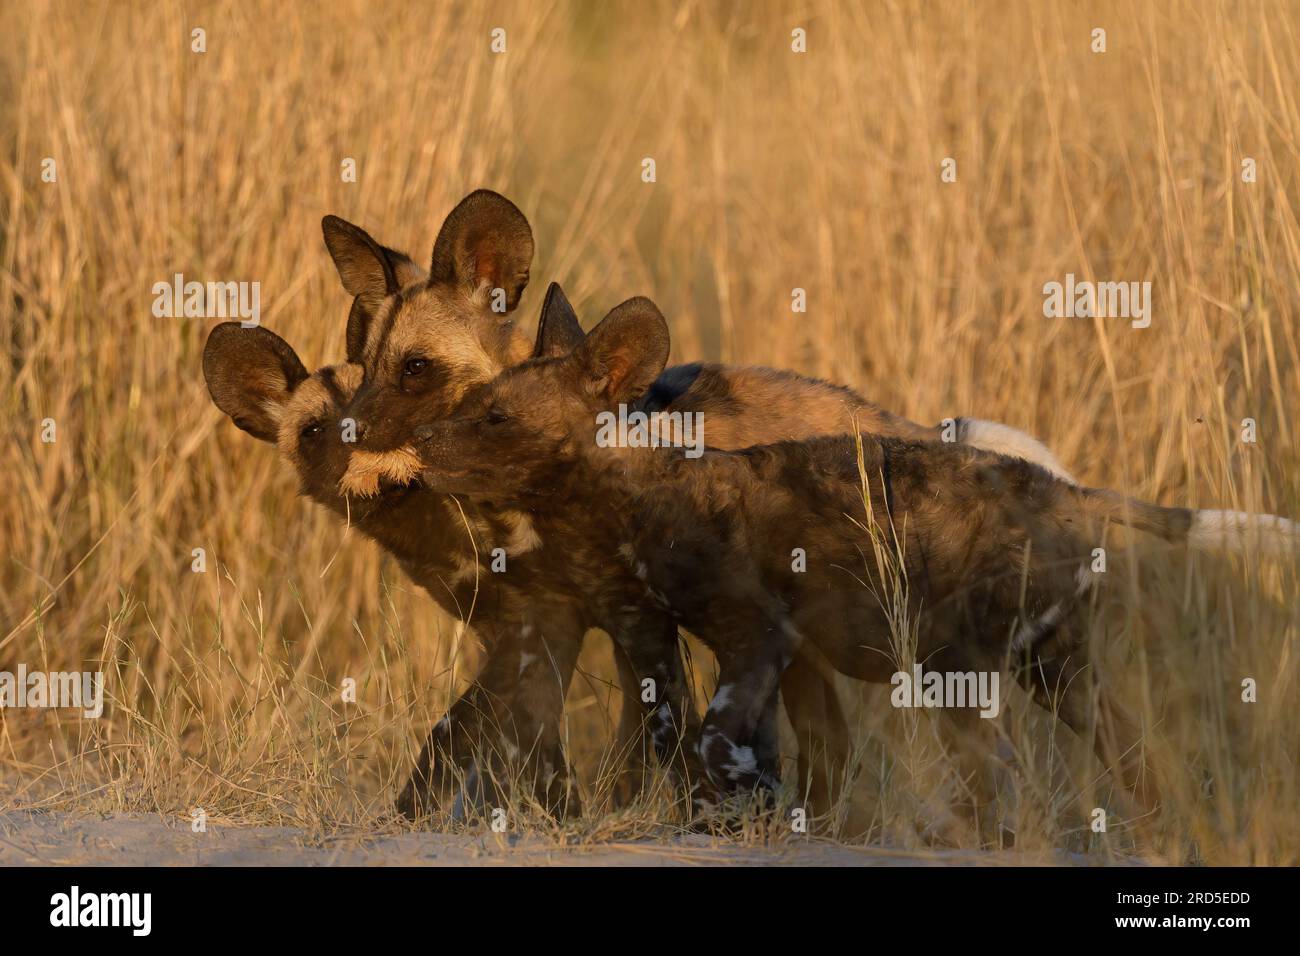 Three Wild Dog puppies play with ear from a recent kill Stock Photo